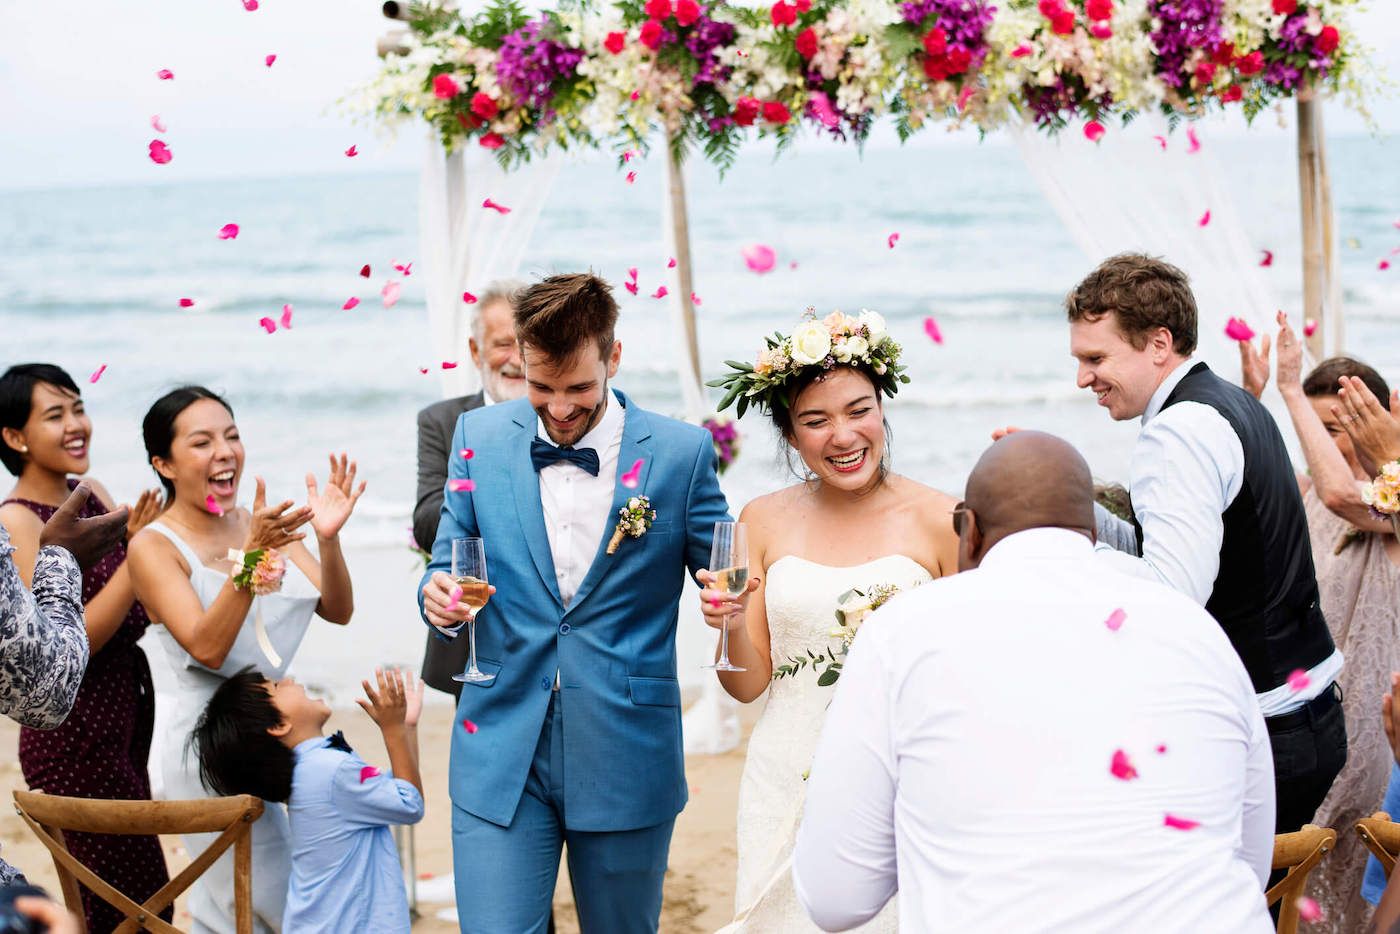 Things You Should Never Spend Money on for a Wedding — Experts Reveal